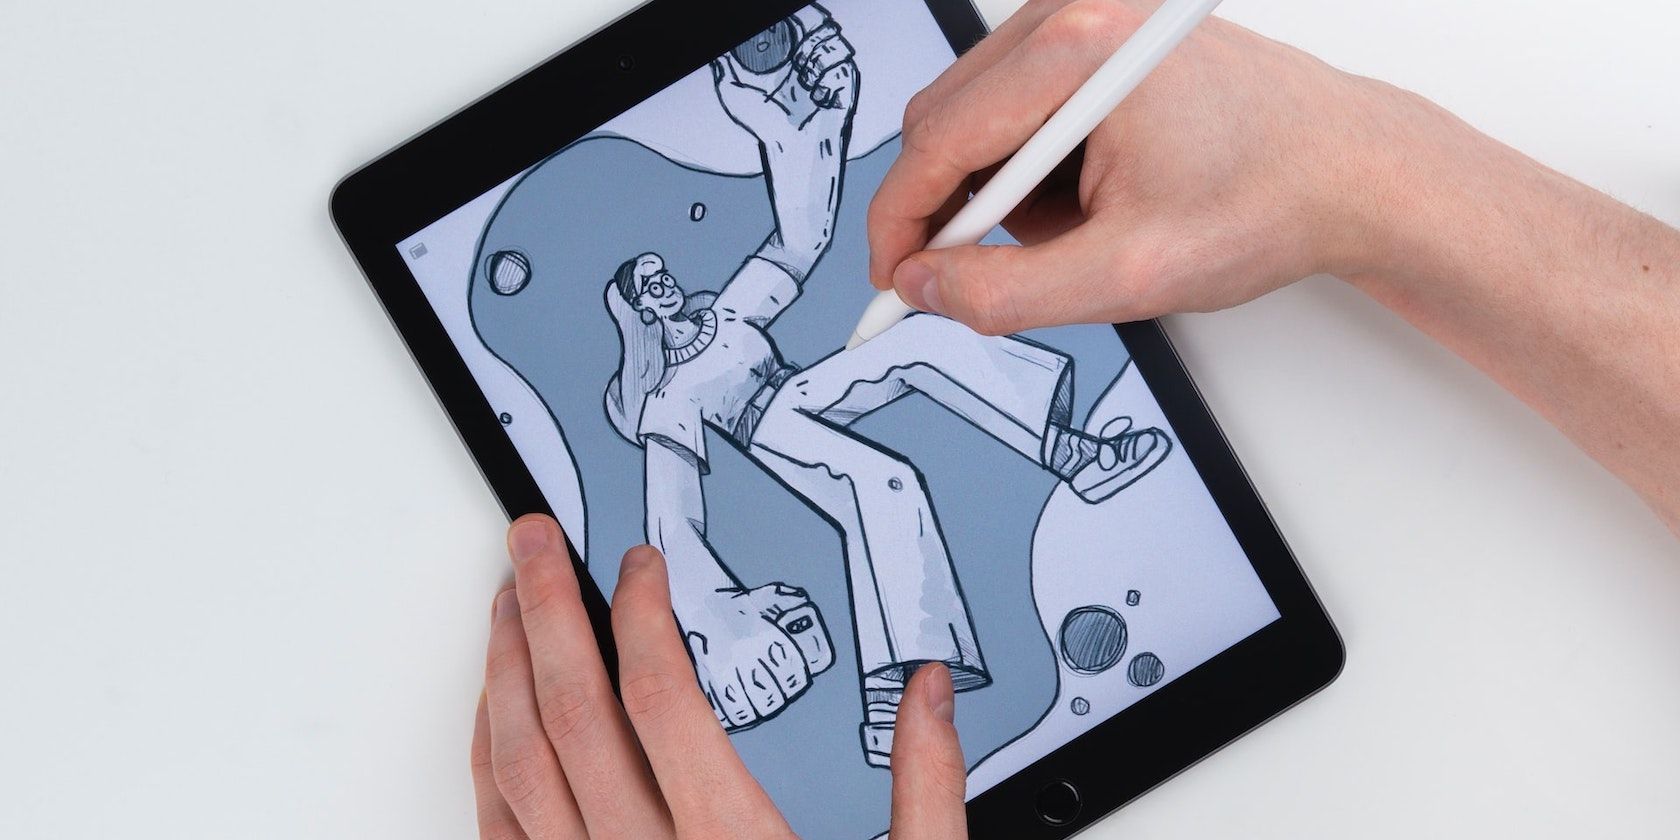 A hand coloring an illustration on an iPad using an Apple Pencil